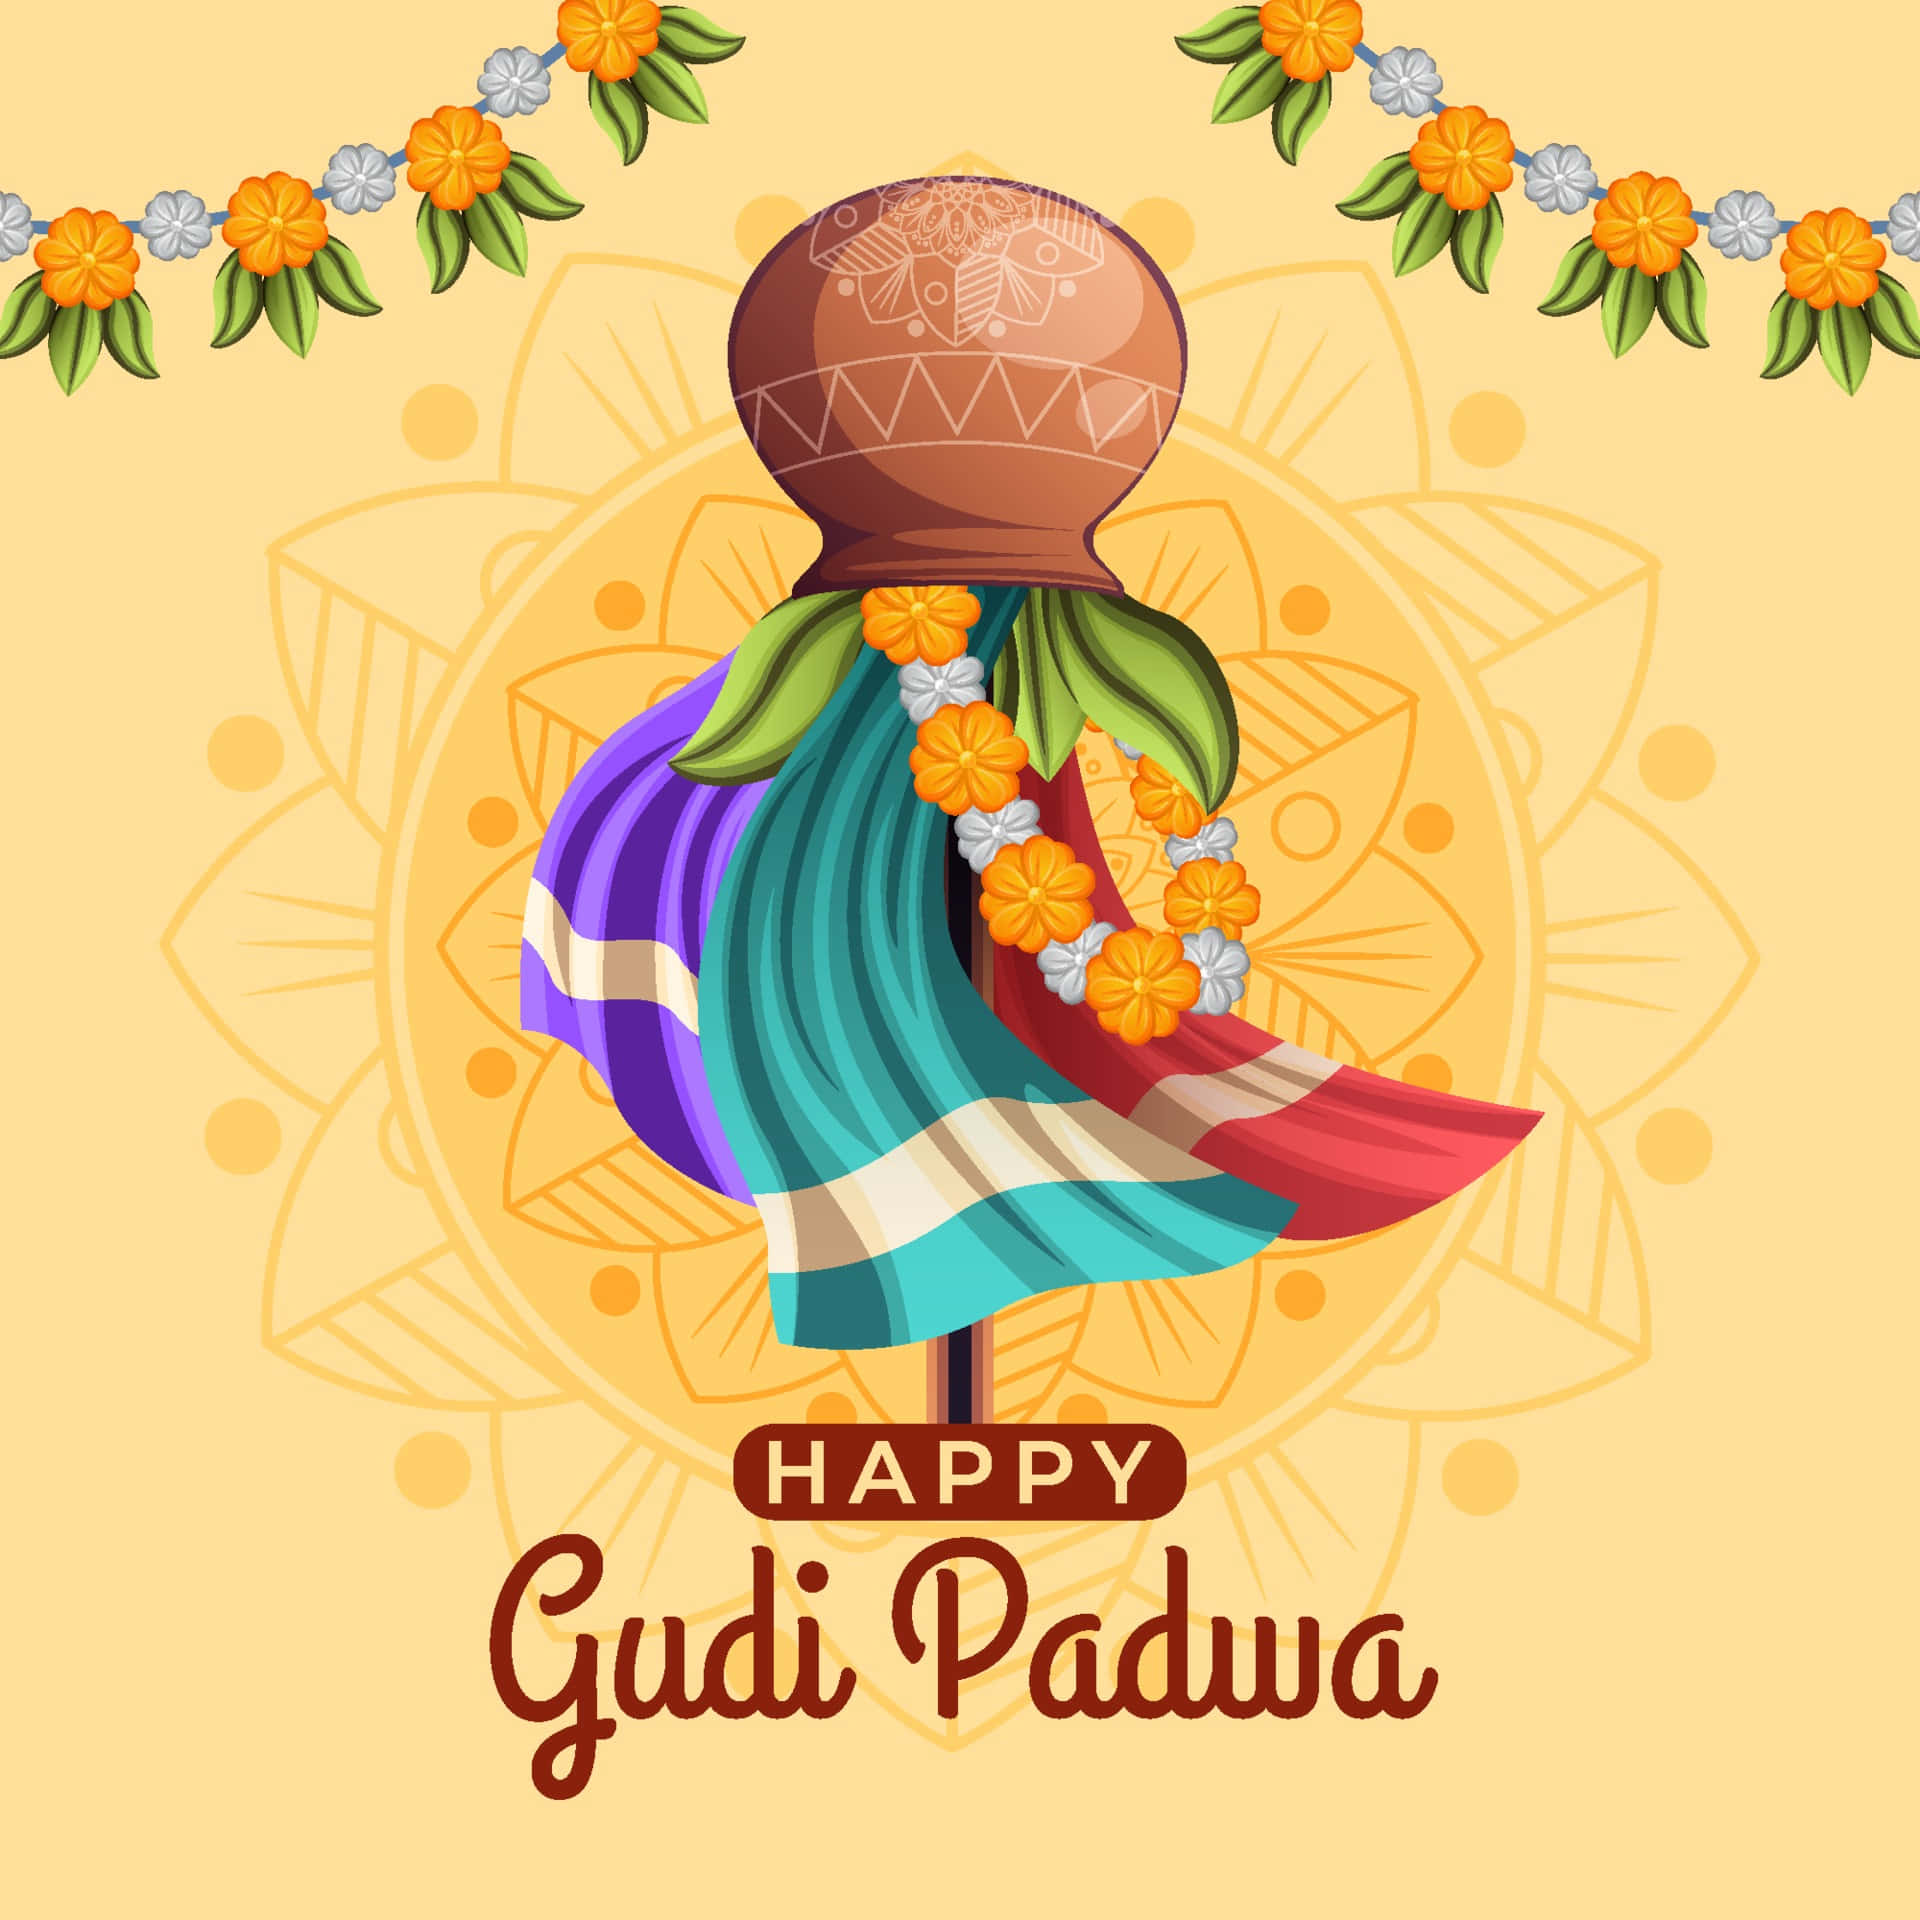 Happy Gudi Padwa With A Flower And A Garland